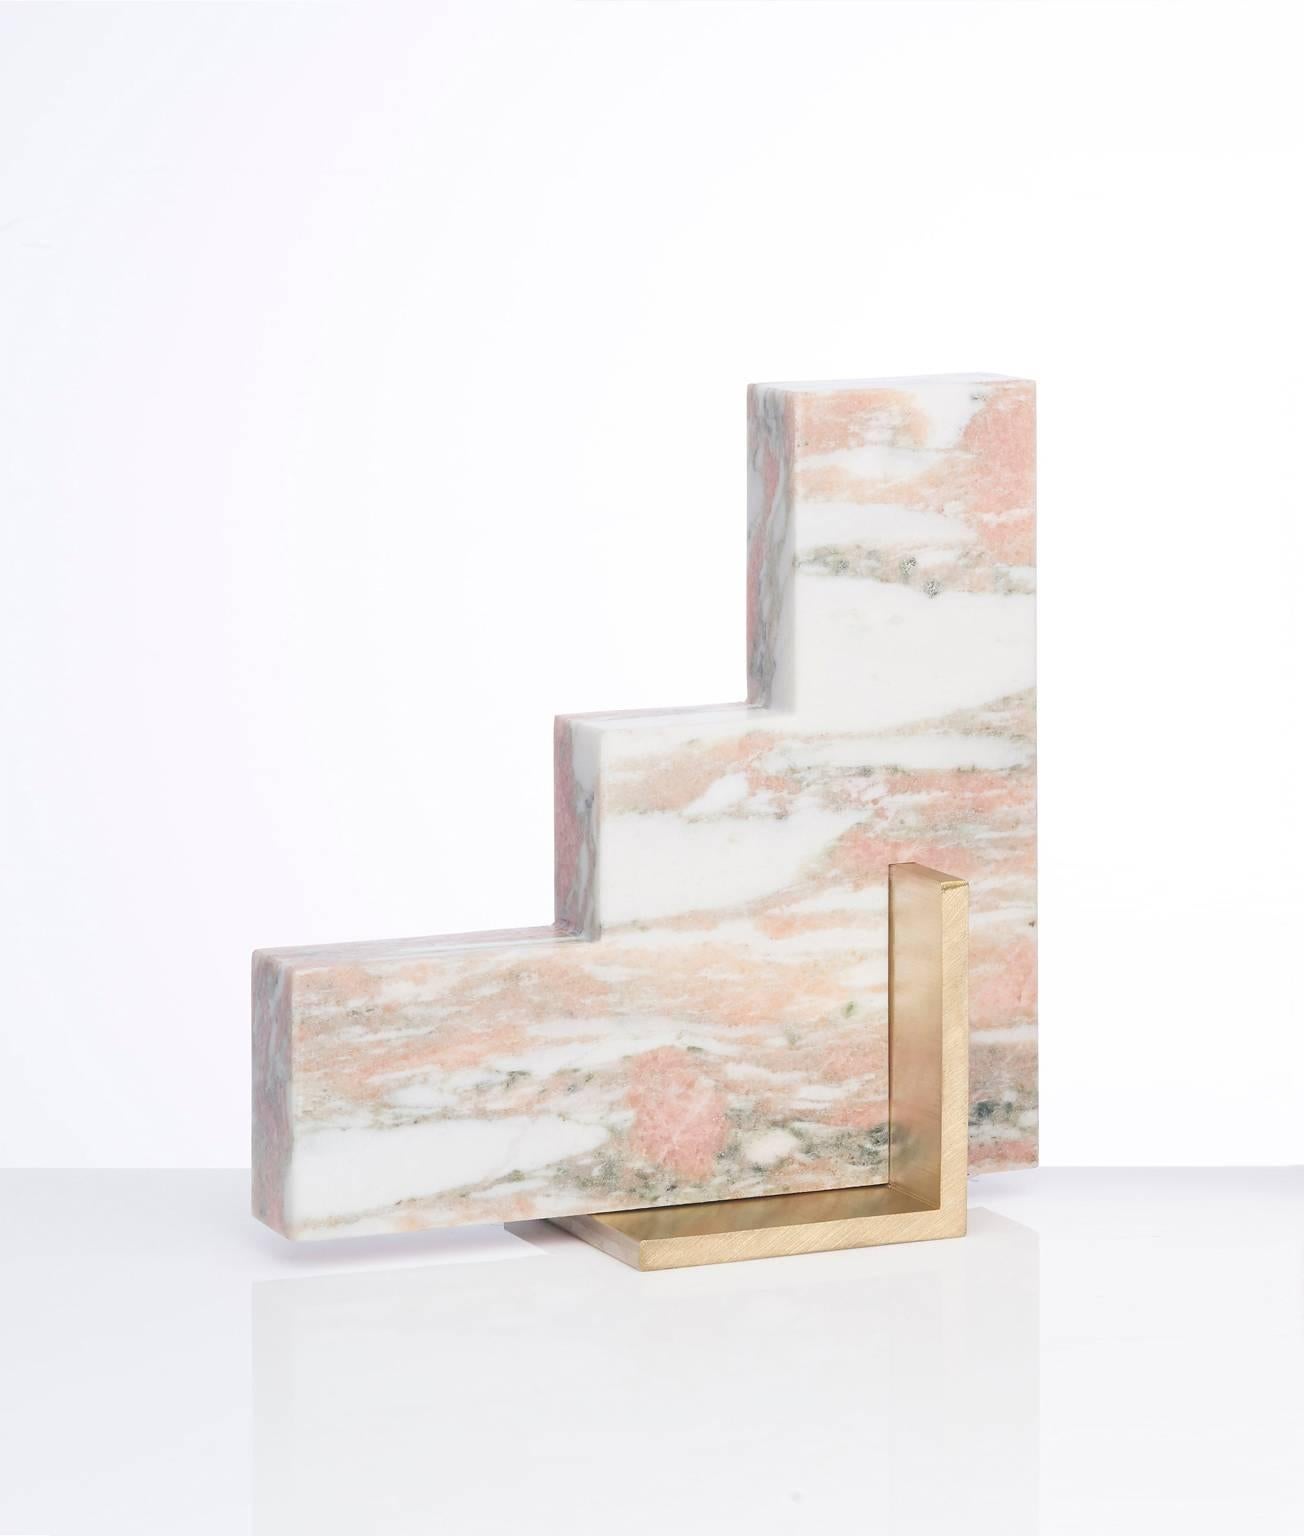 Meet Steppy; one half of the odd couple bookends set which are now available to buy individually. You can now mix and match colors and shapes.
Steppy is shown here in Norwegian Rose marble and a brushed brass base.
The marble is cut into a geometric